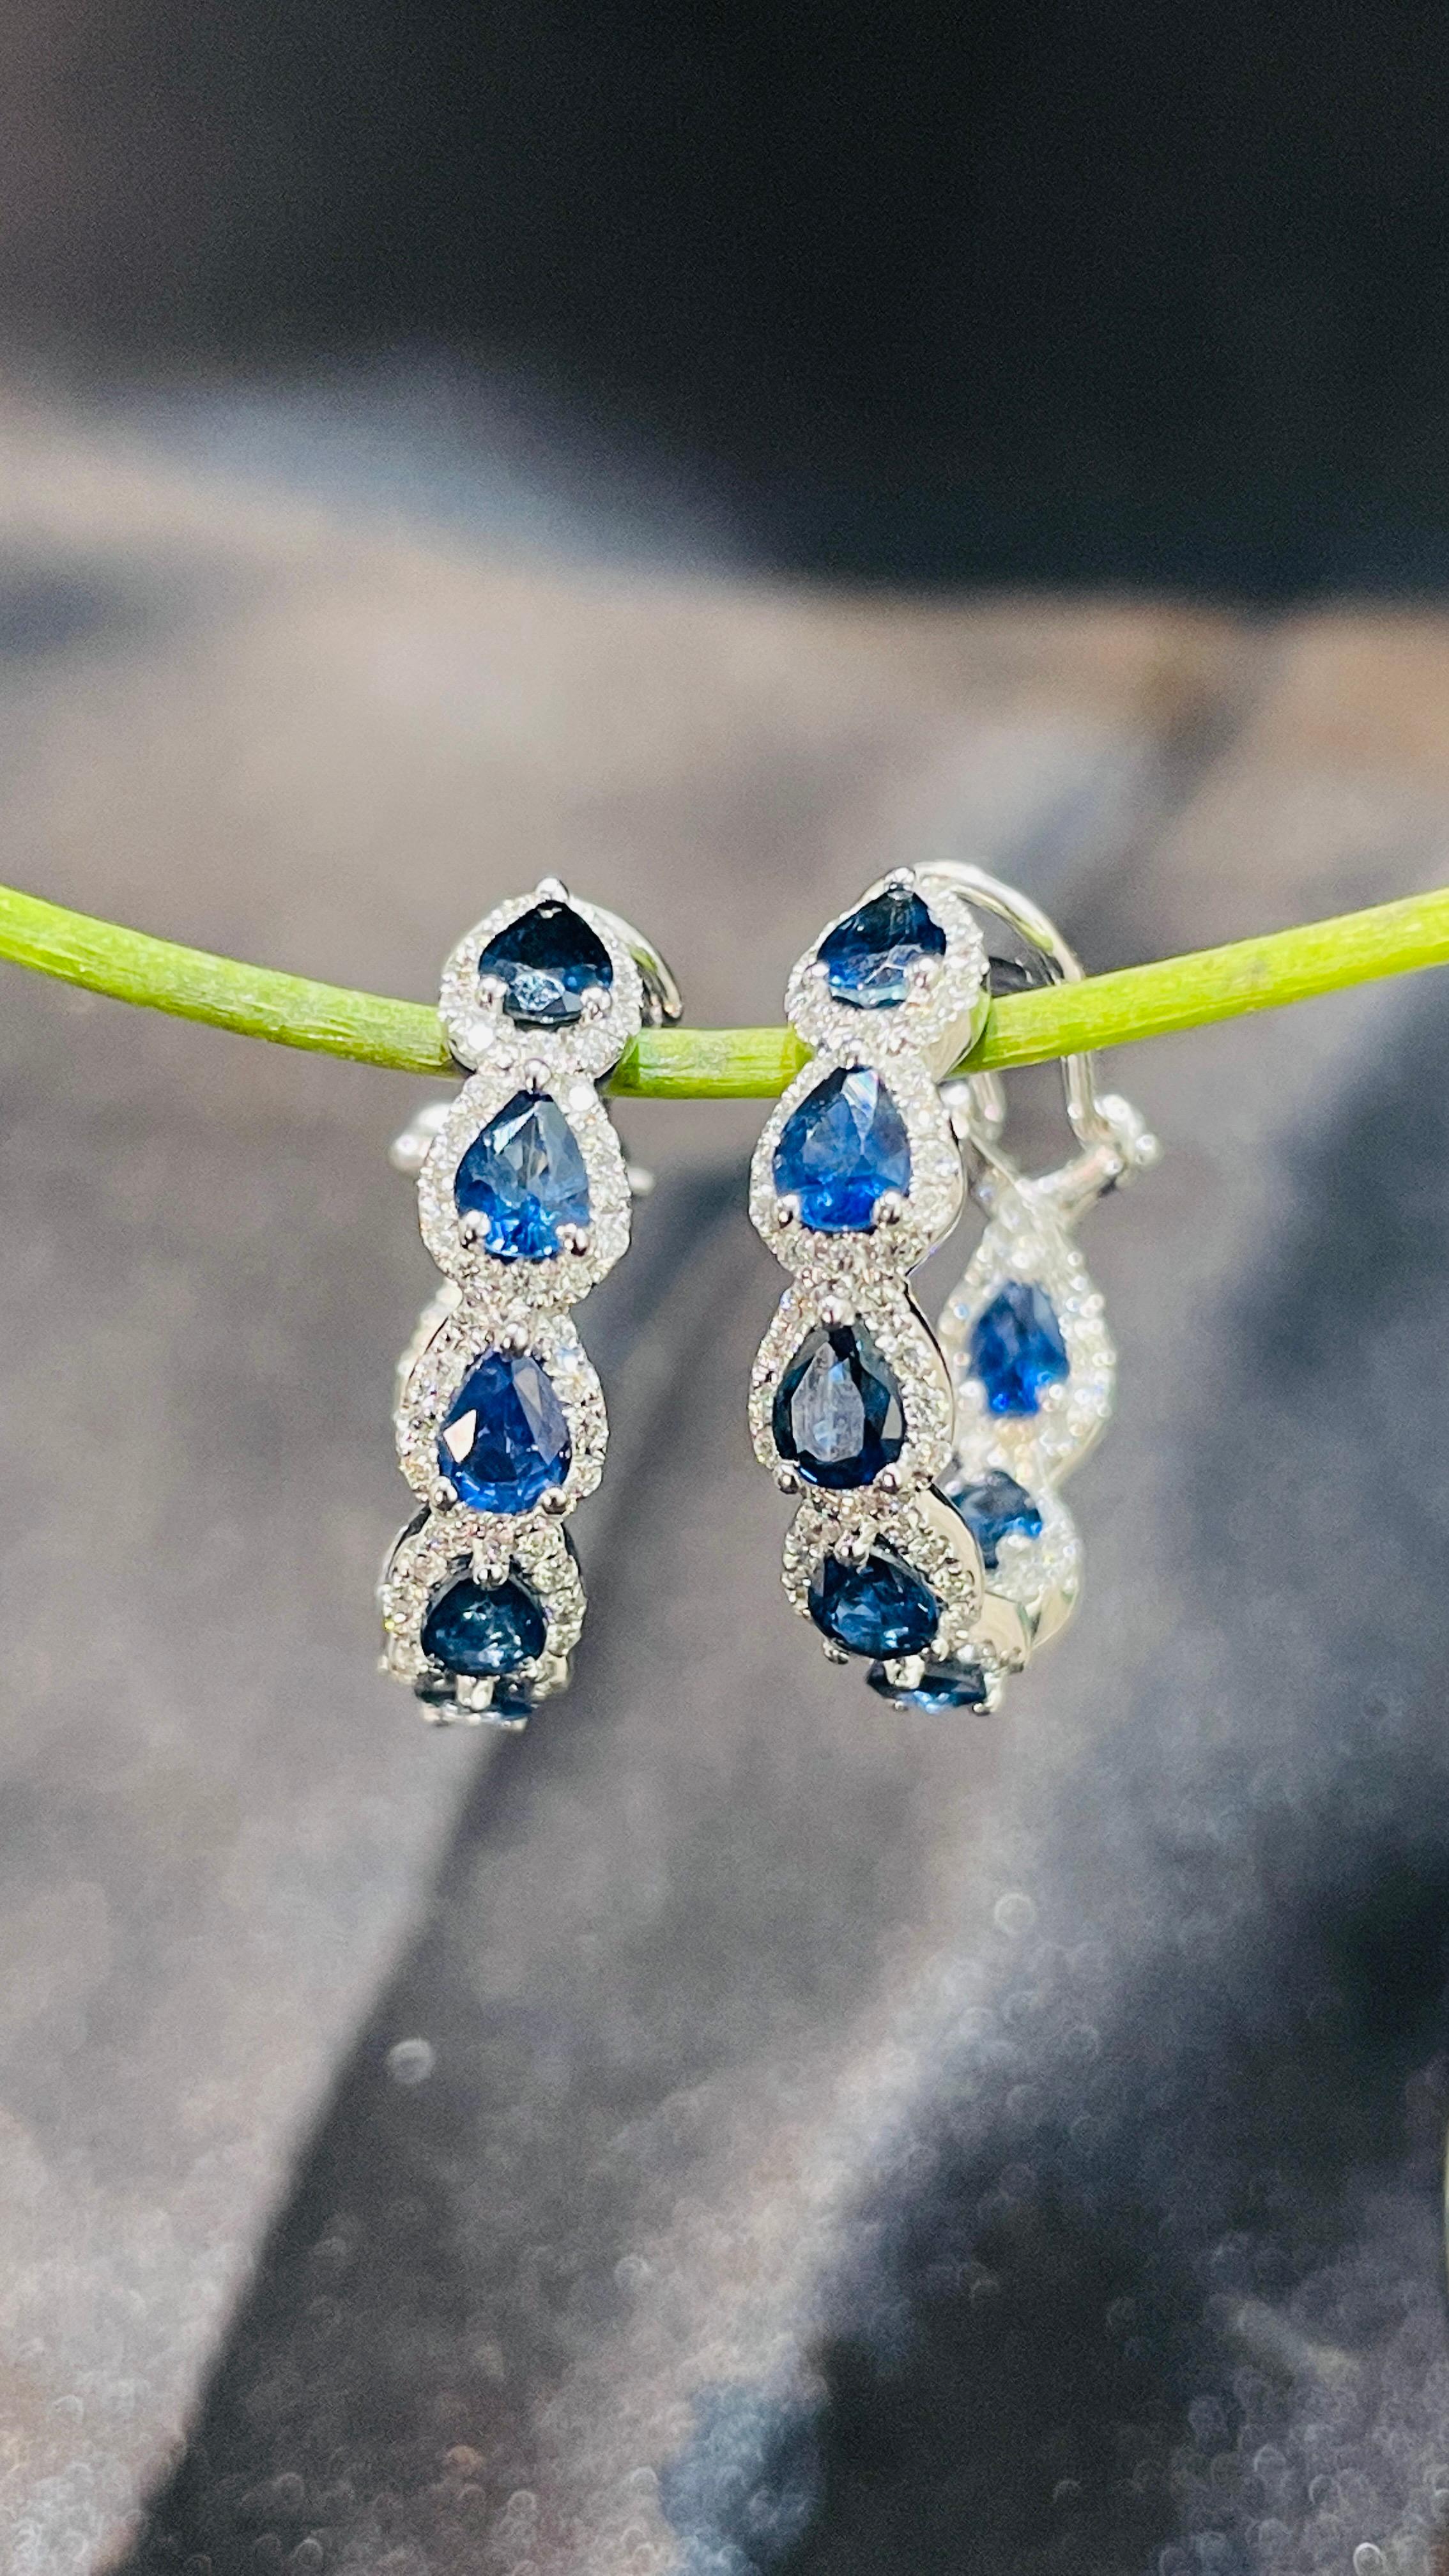 14k gold diamond hoop earring with blue sapphires